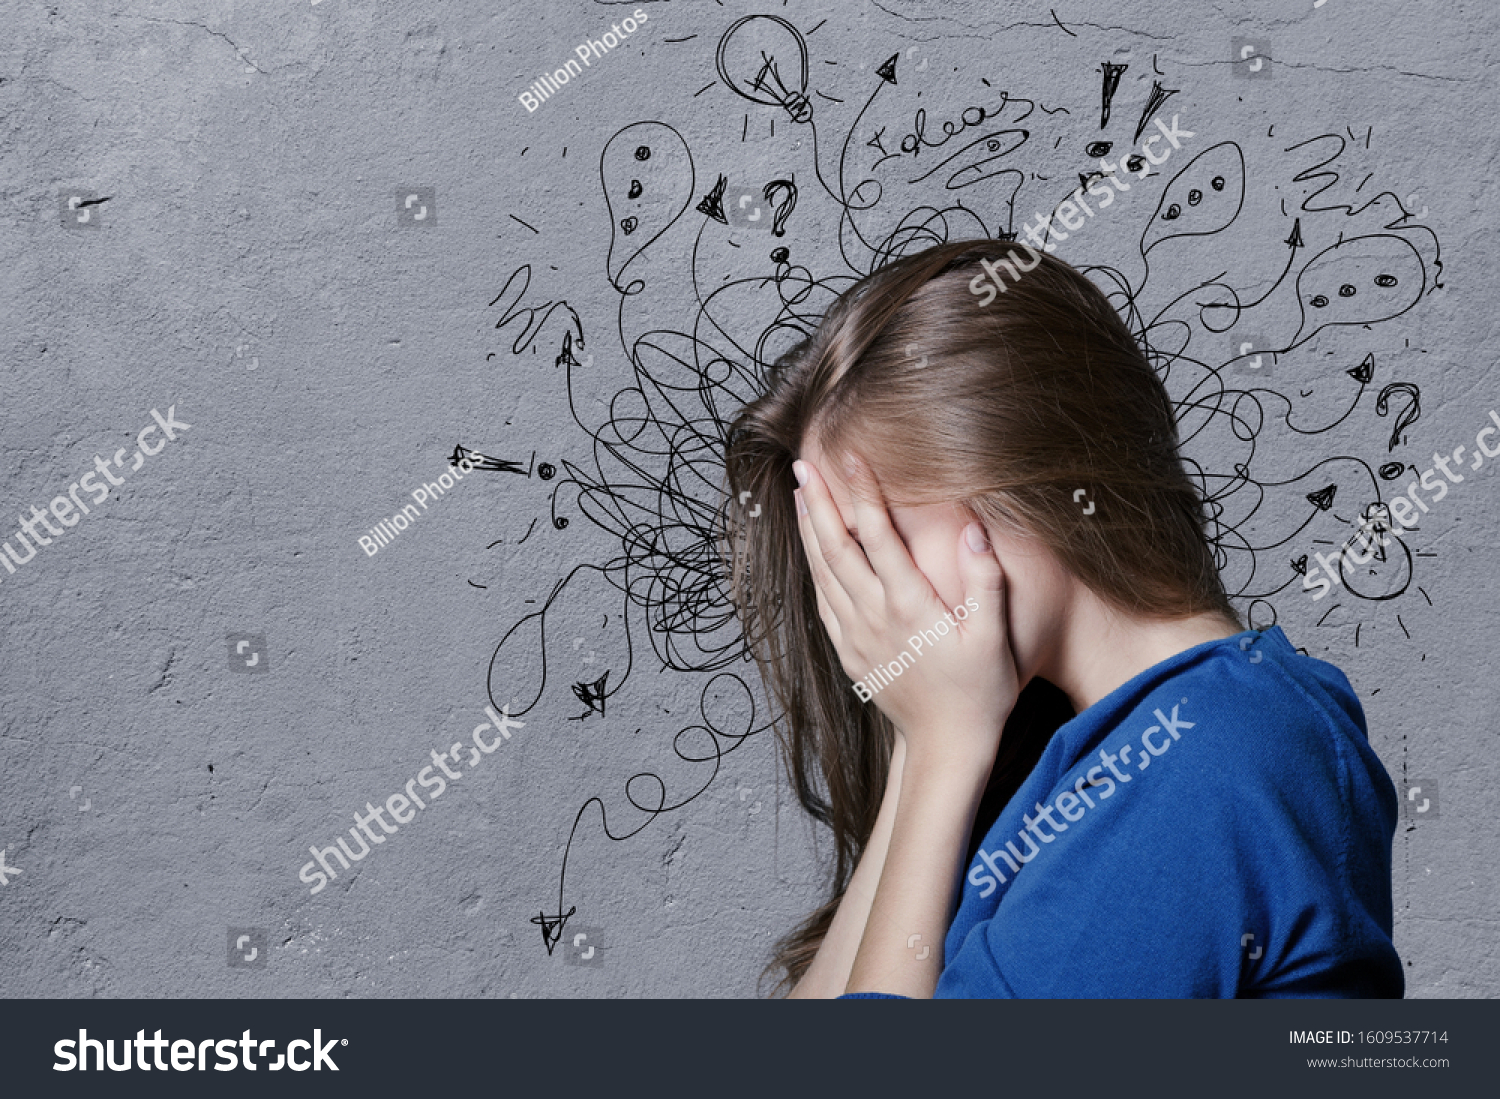 Young man with worried stressed face expression with illustration #1609537714